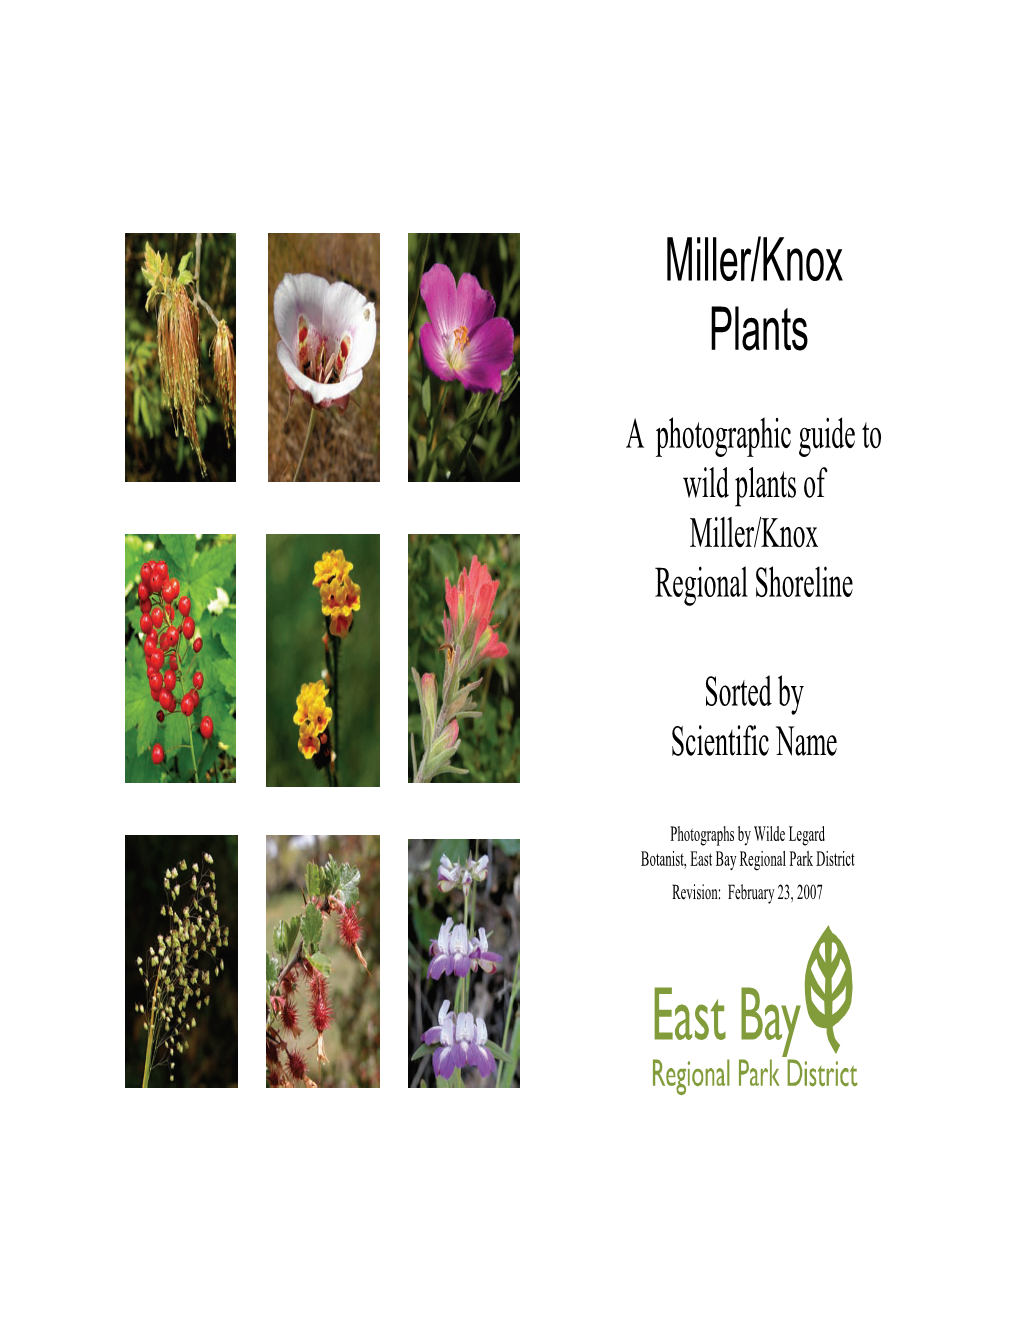 A Photographic Guide to Wild Plants of Miller/Knox Regional Shoreline Sorted by Scientific Name